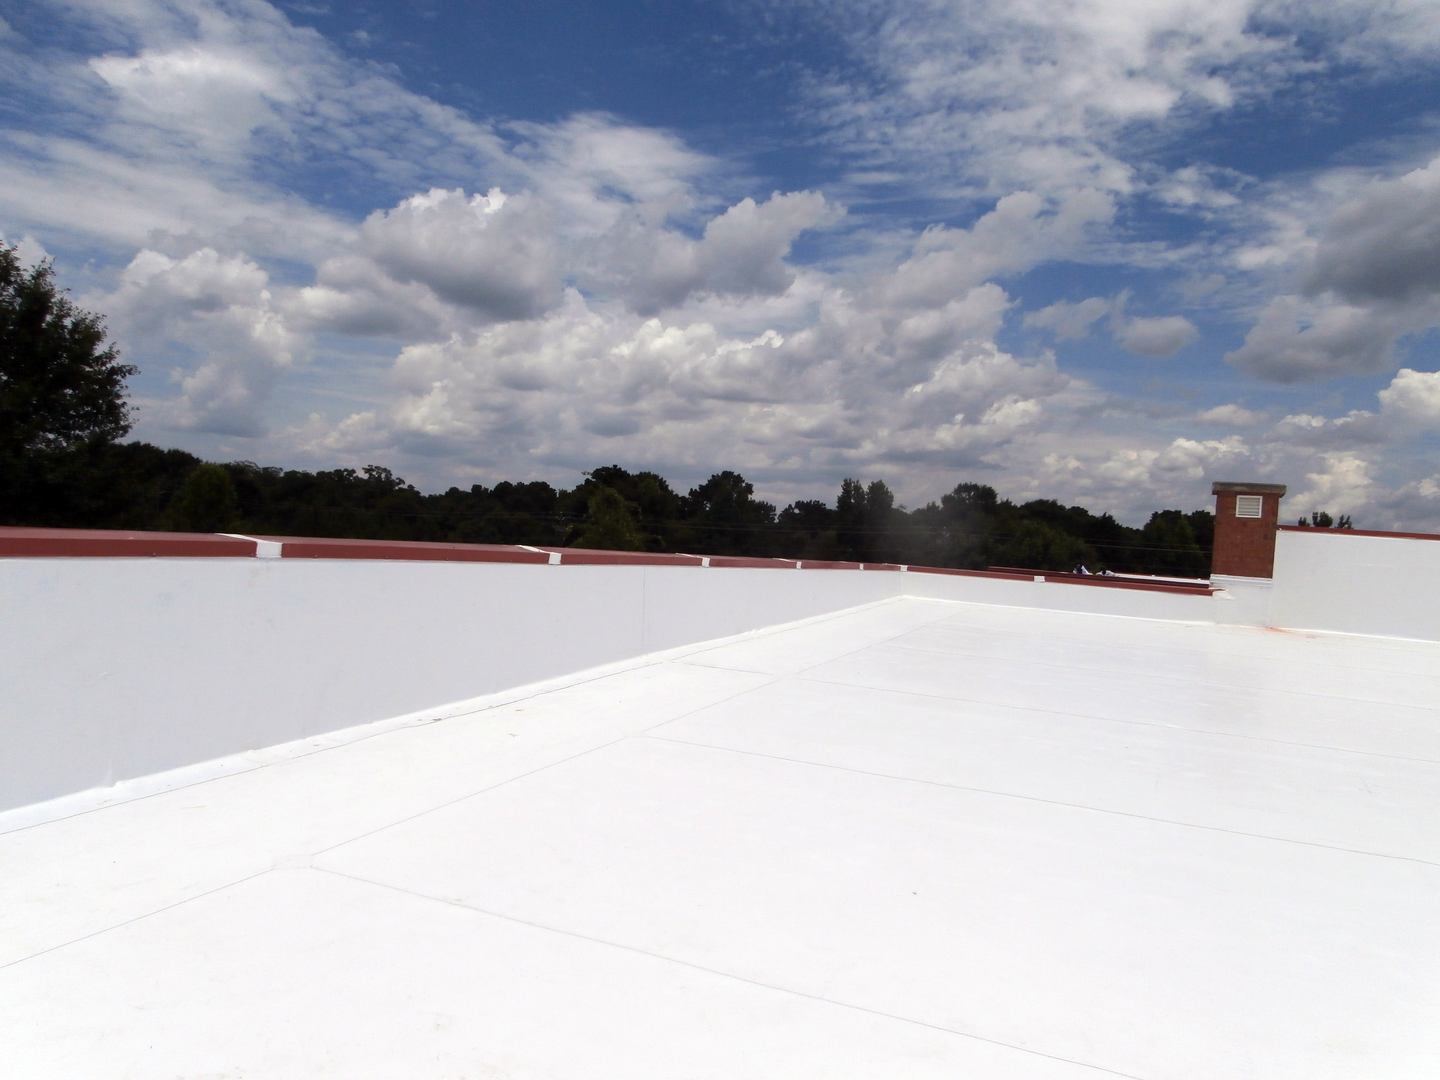 Featured CommercialRoof Gallery